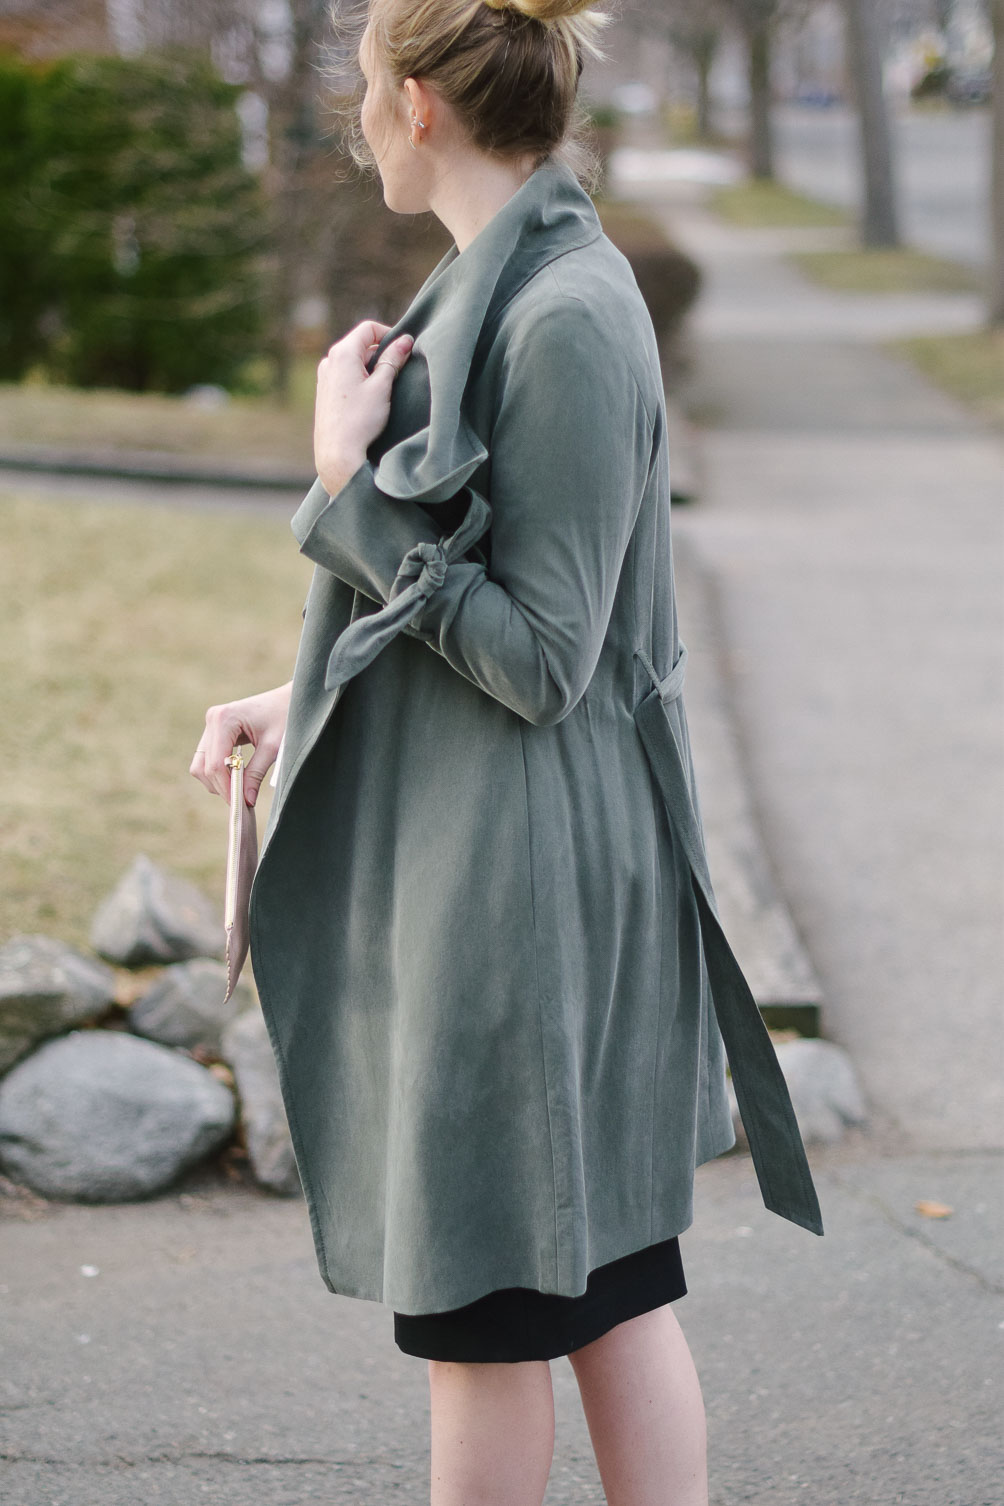 styling a feminine green trench coat for transitioning to spring with peplum details and a pencil skirt